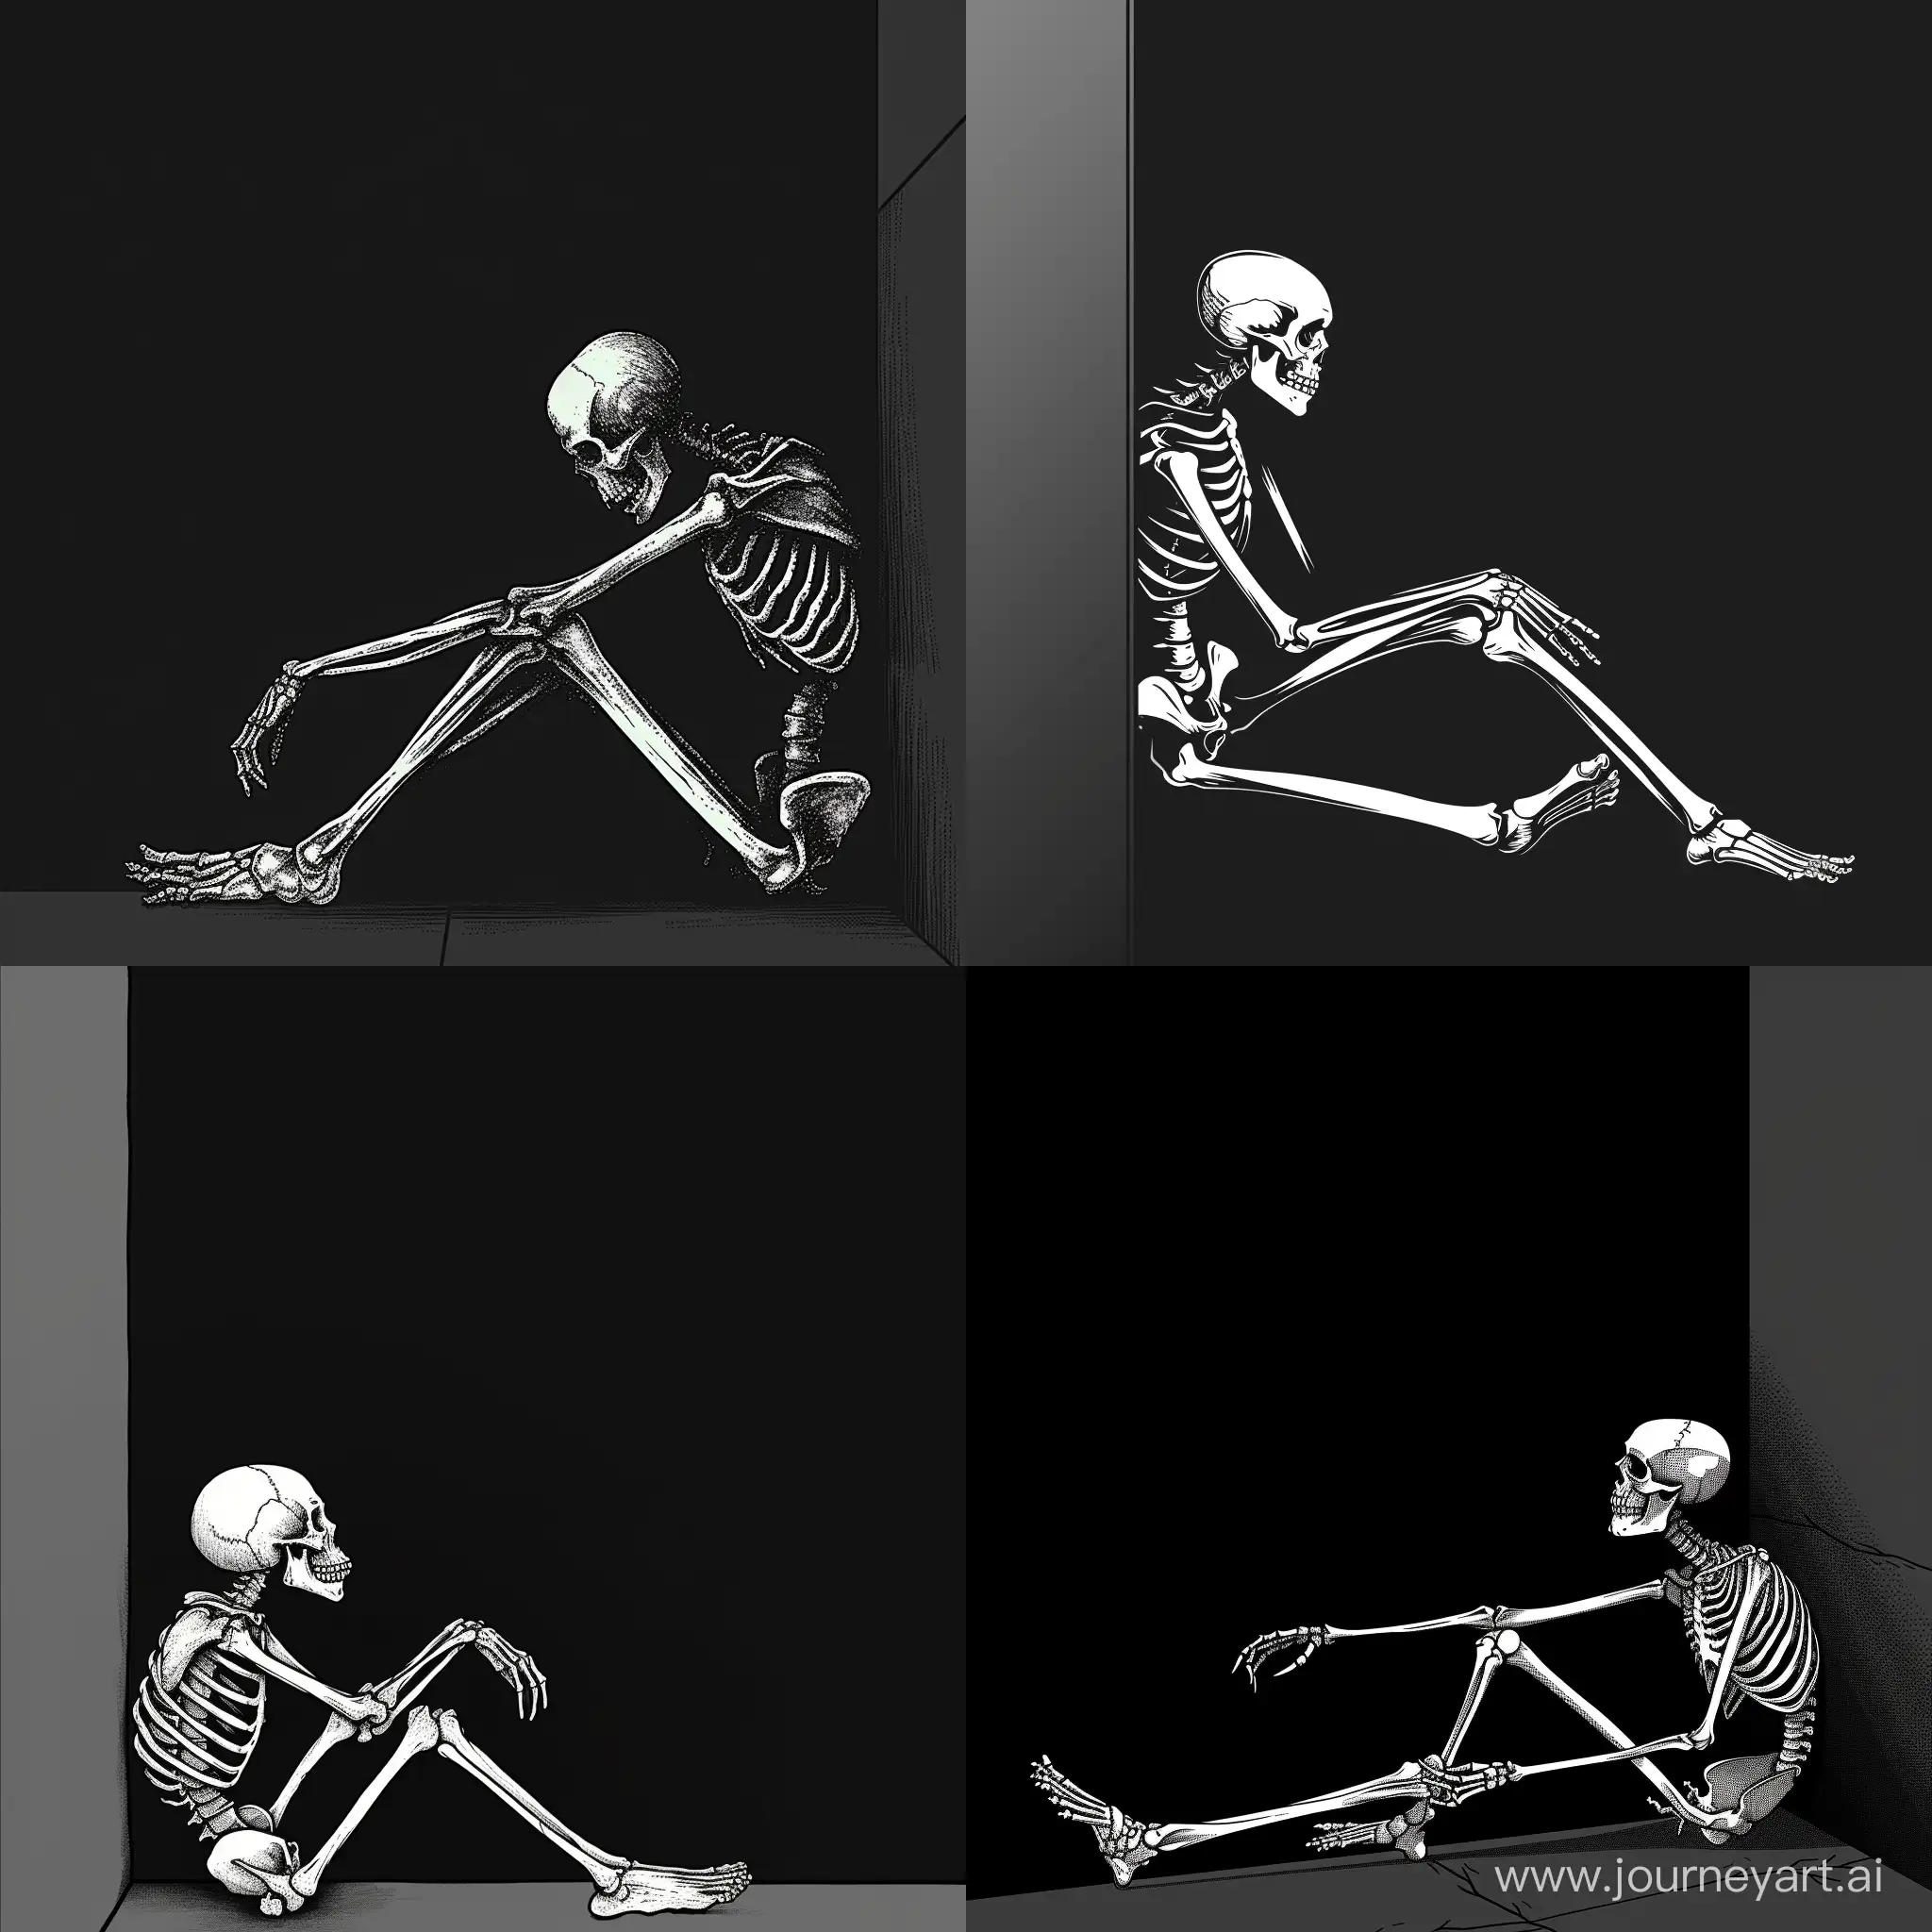 Lonely-Skeleton-Huddled-in-Corner-Reaching-Out-in-Sadness